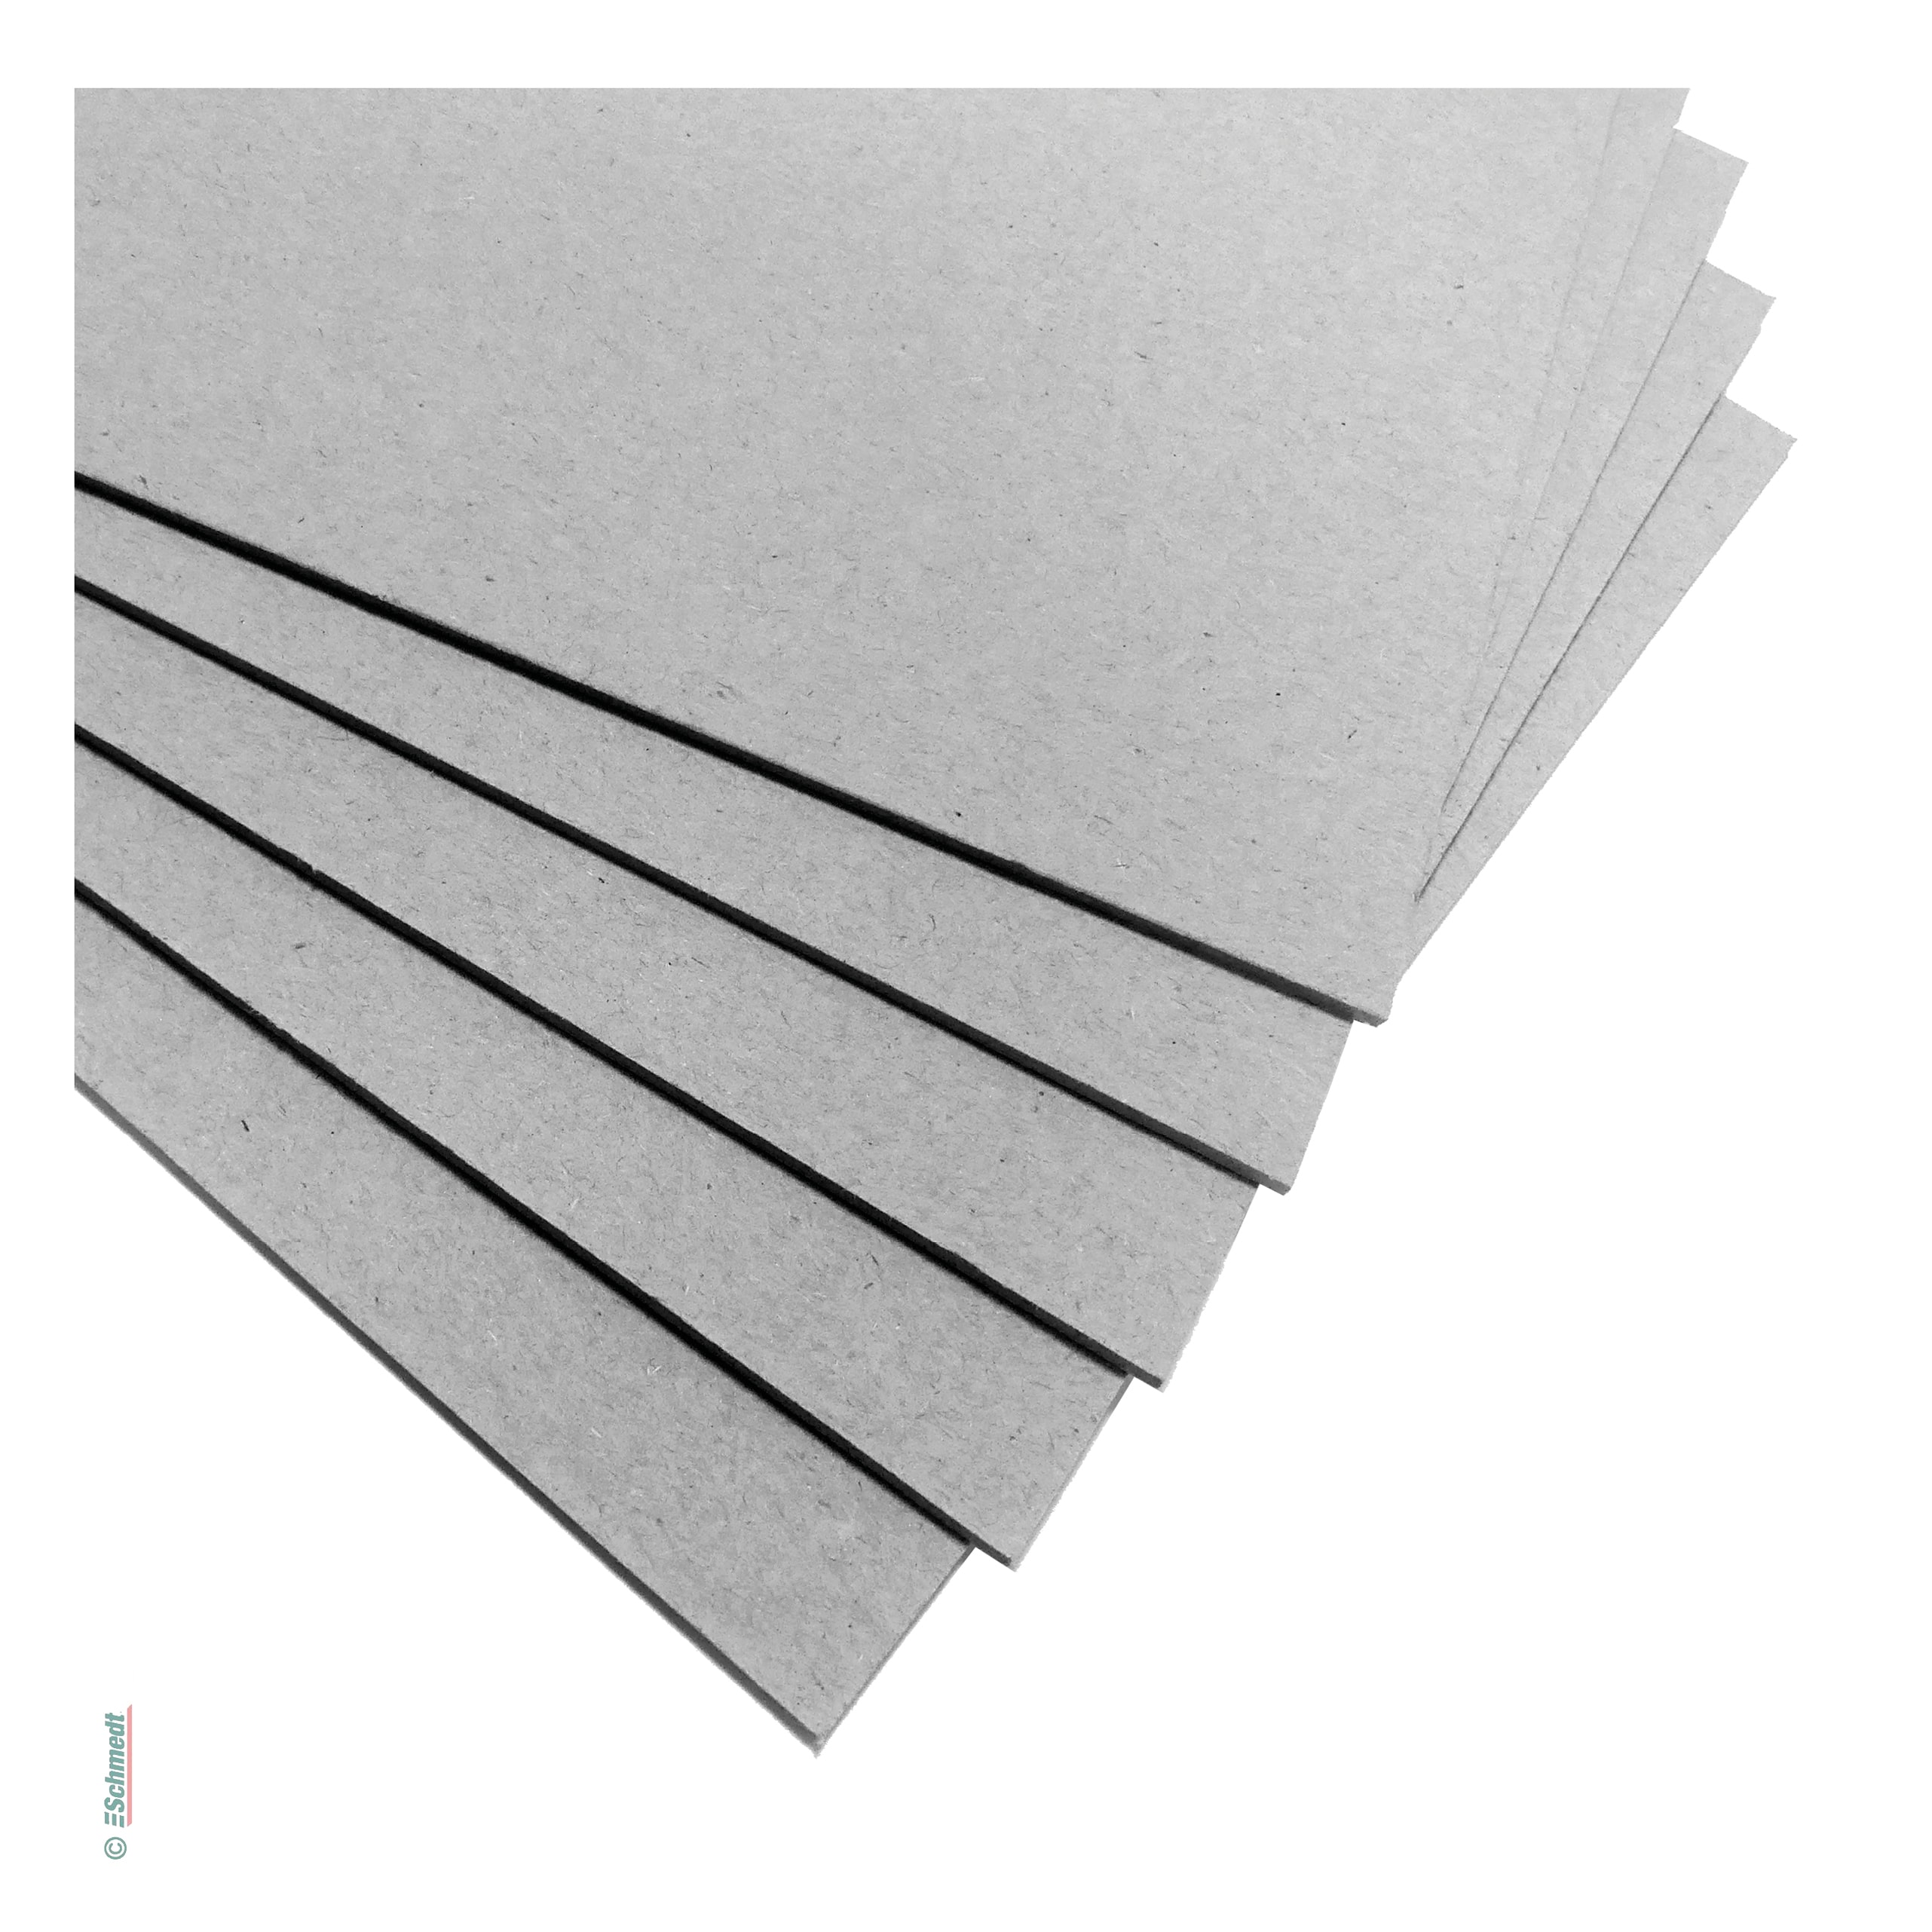 F3 12 X 12 SQUARE WITH ADHESIVE 5/8 THICK 